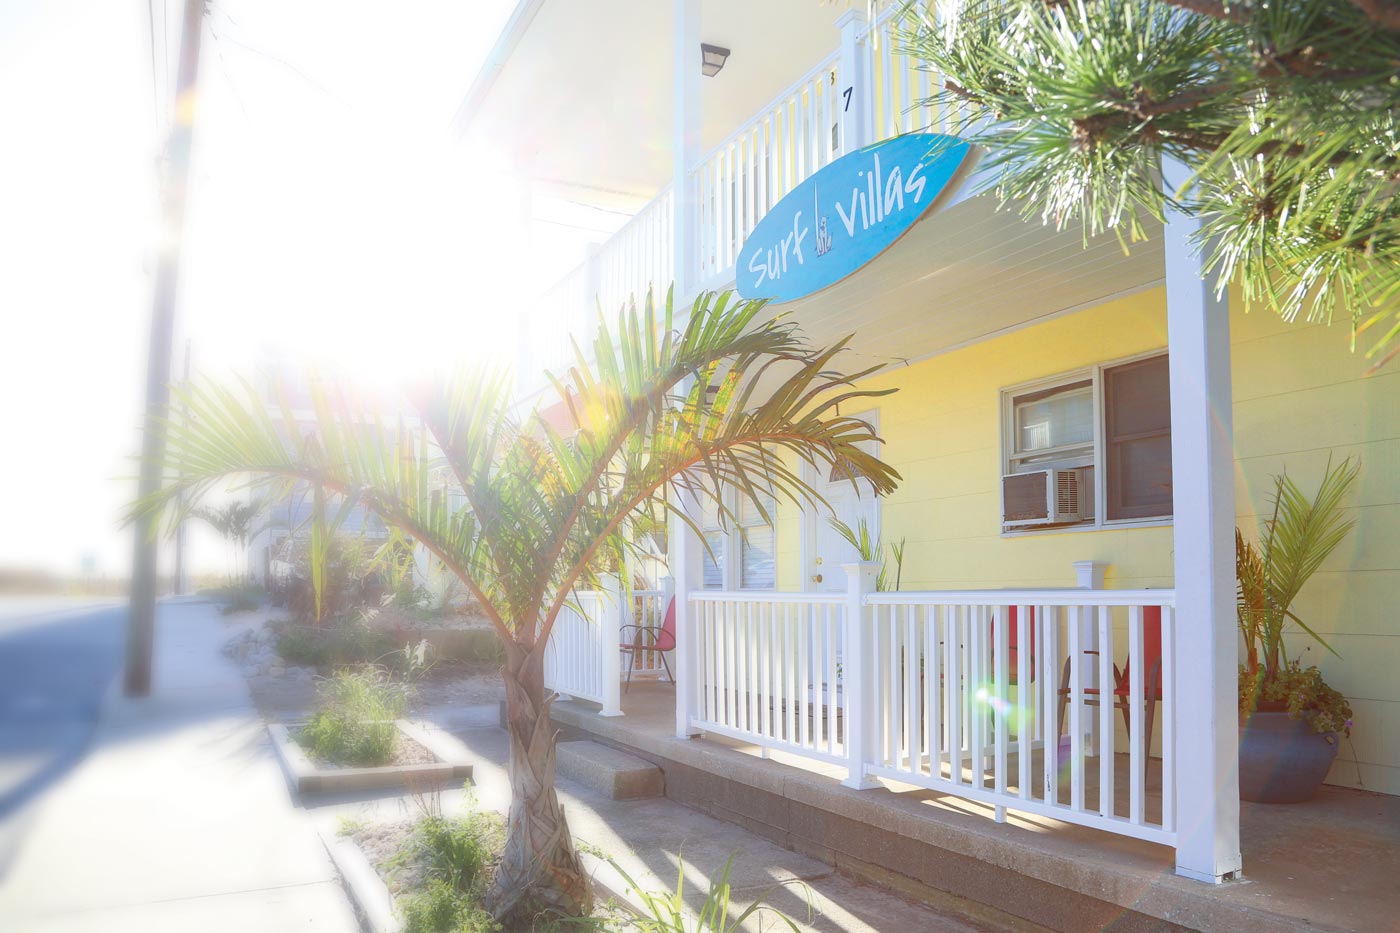 surf villas front porch with building sign angle